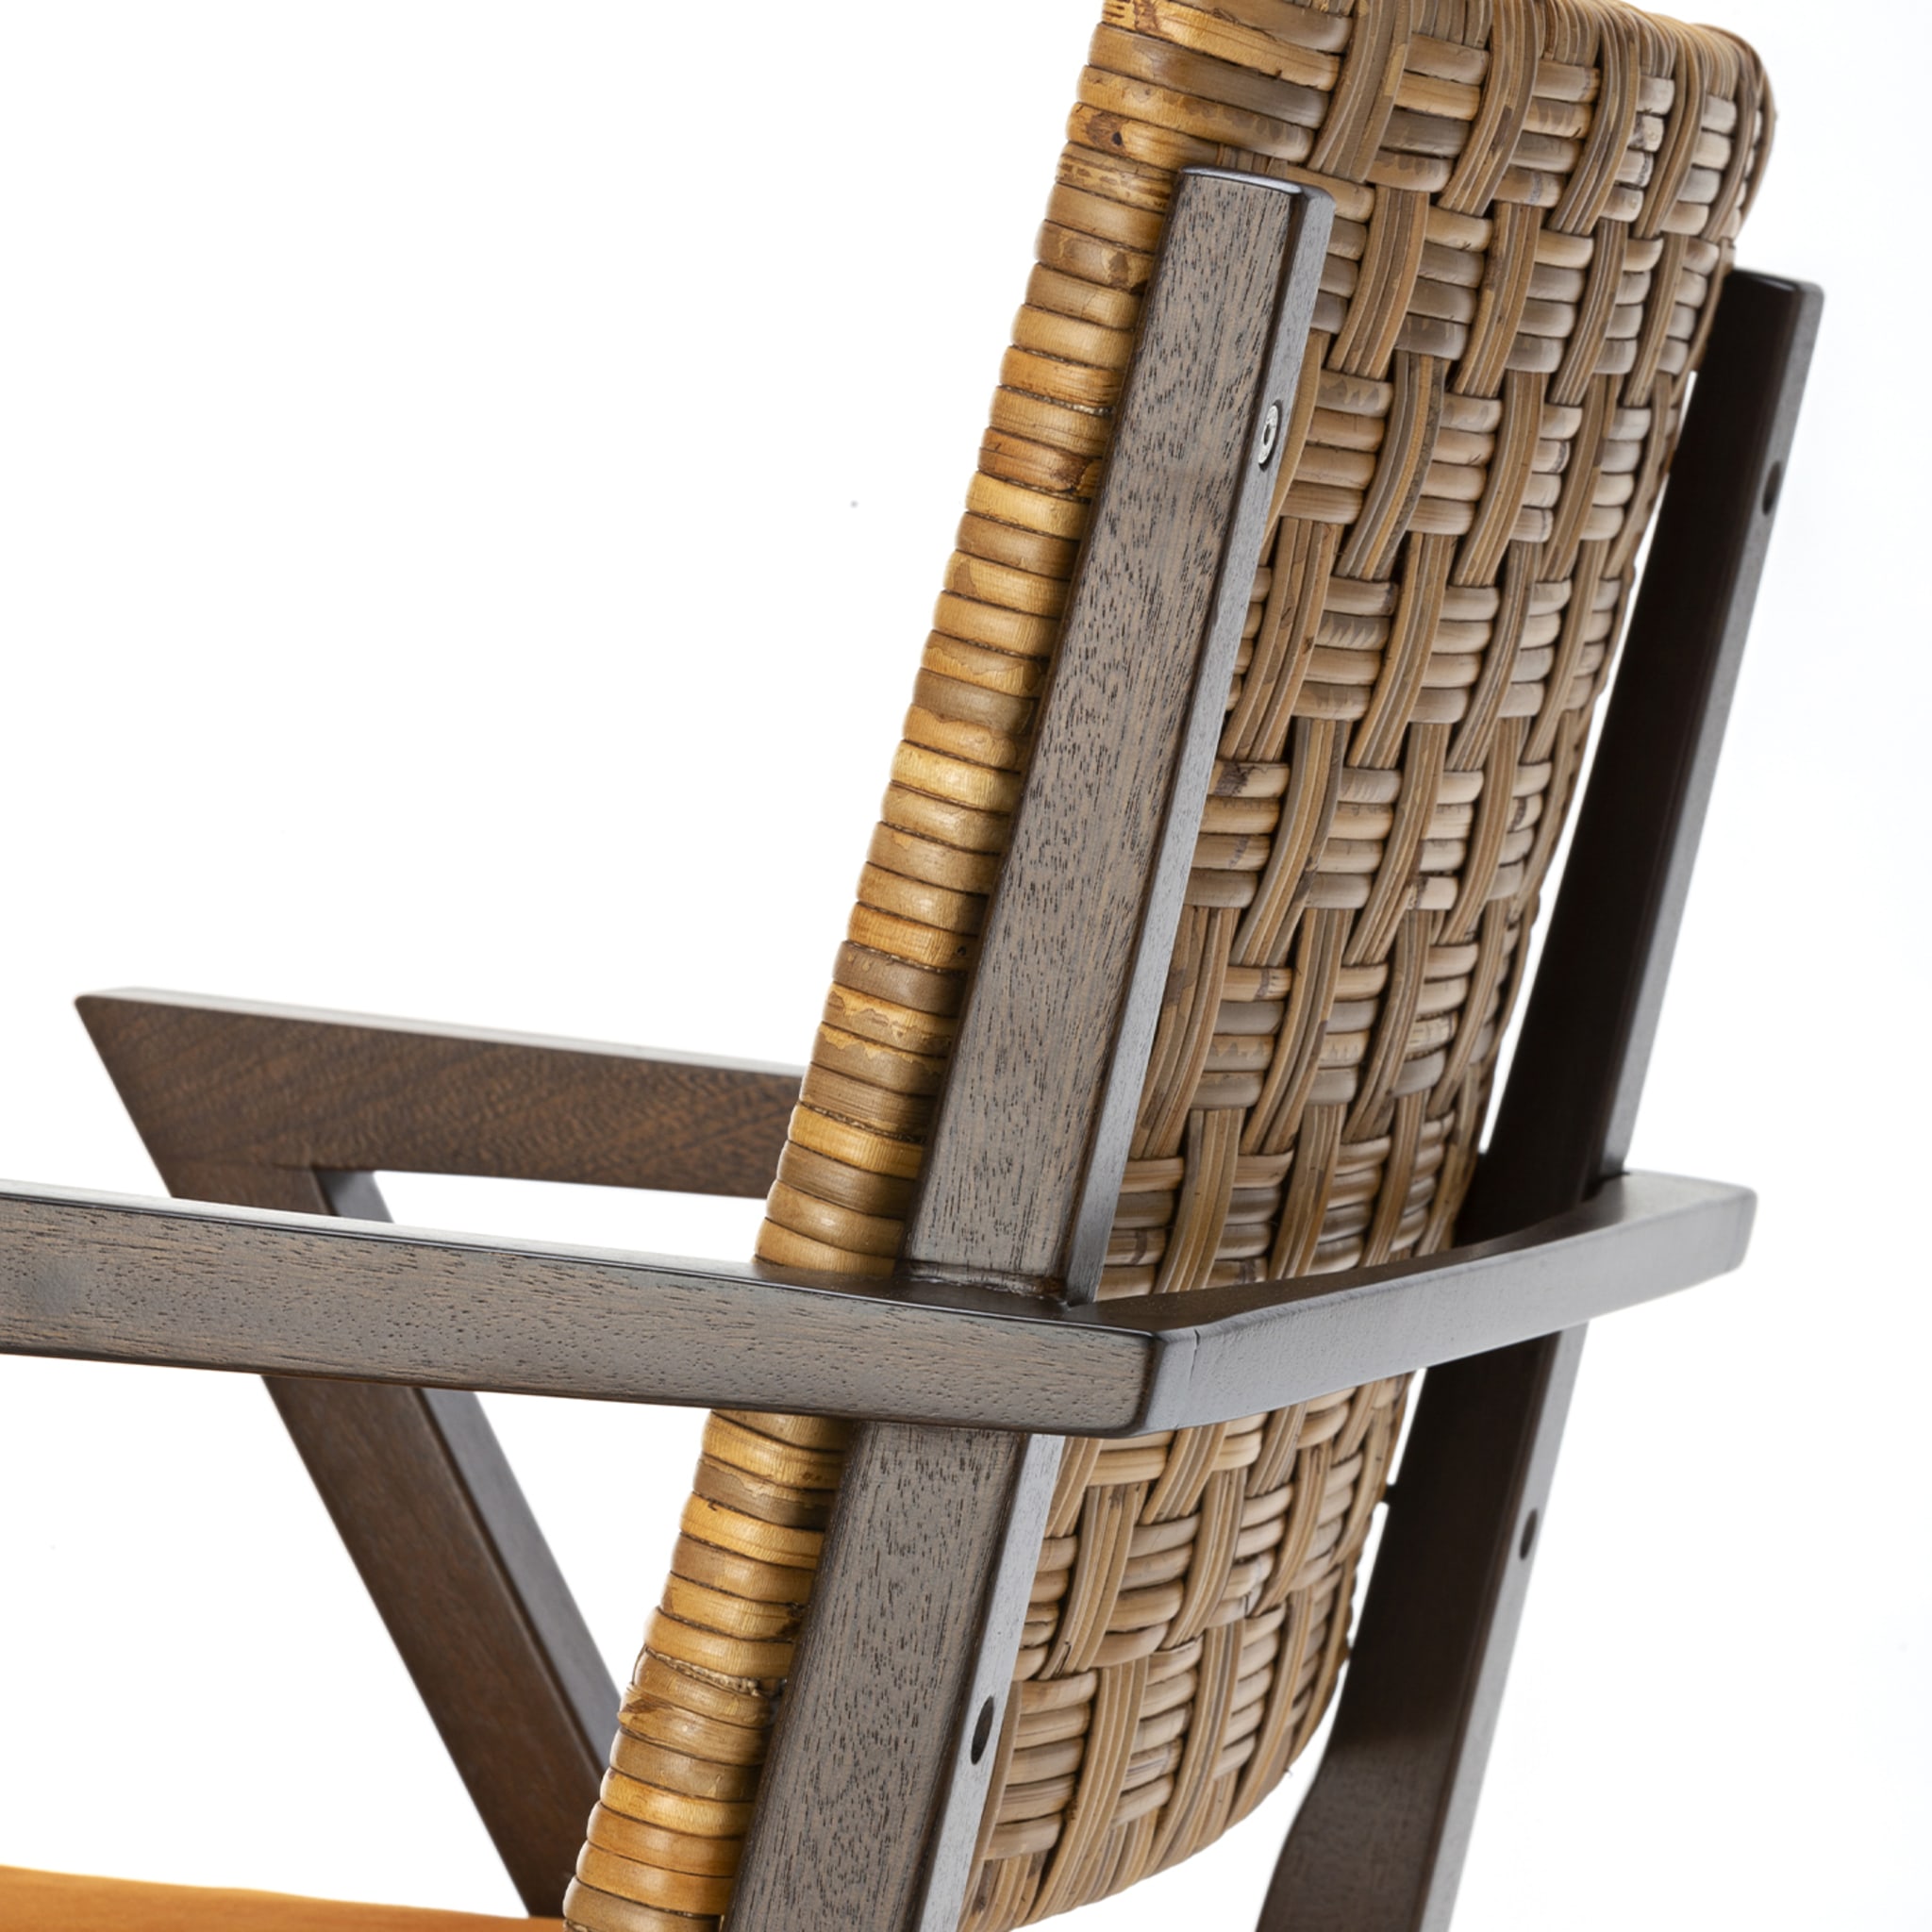 Lupo 1945 Chair by Franco Albini - Alternative view 4